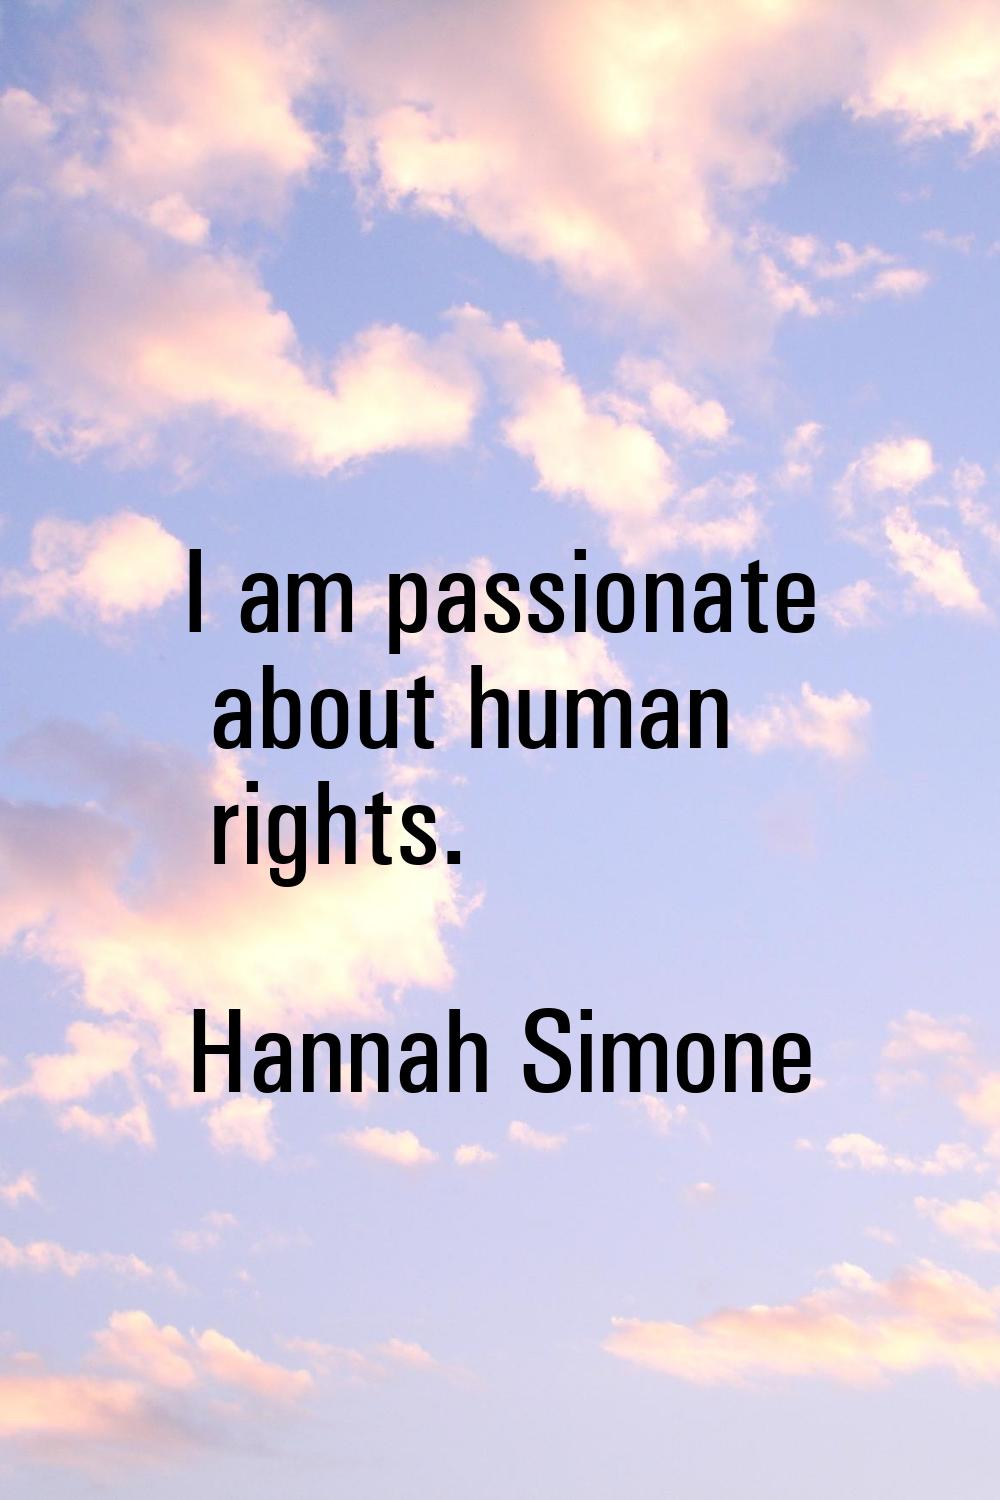 I am passionate about human rights.